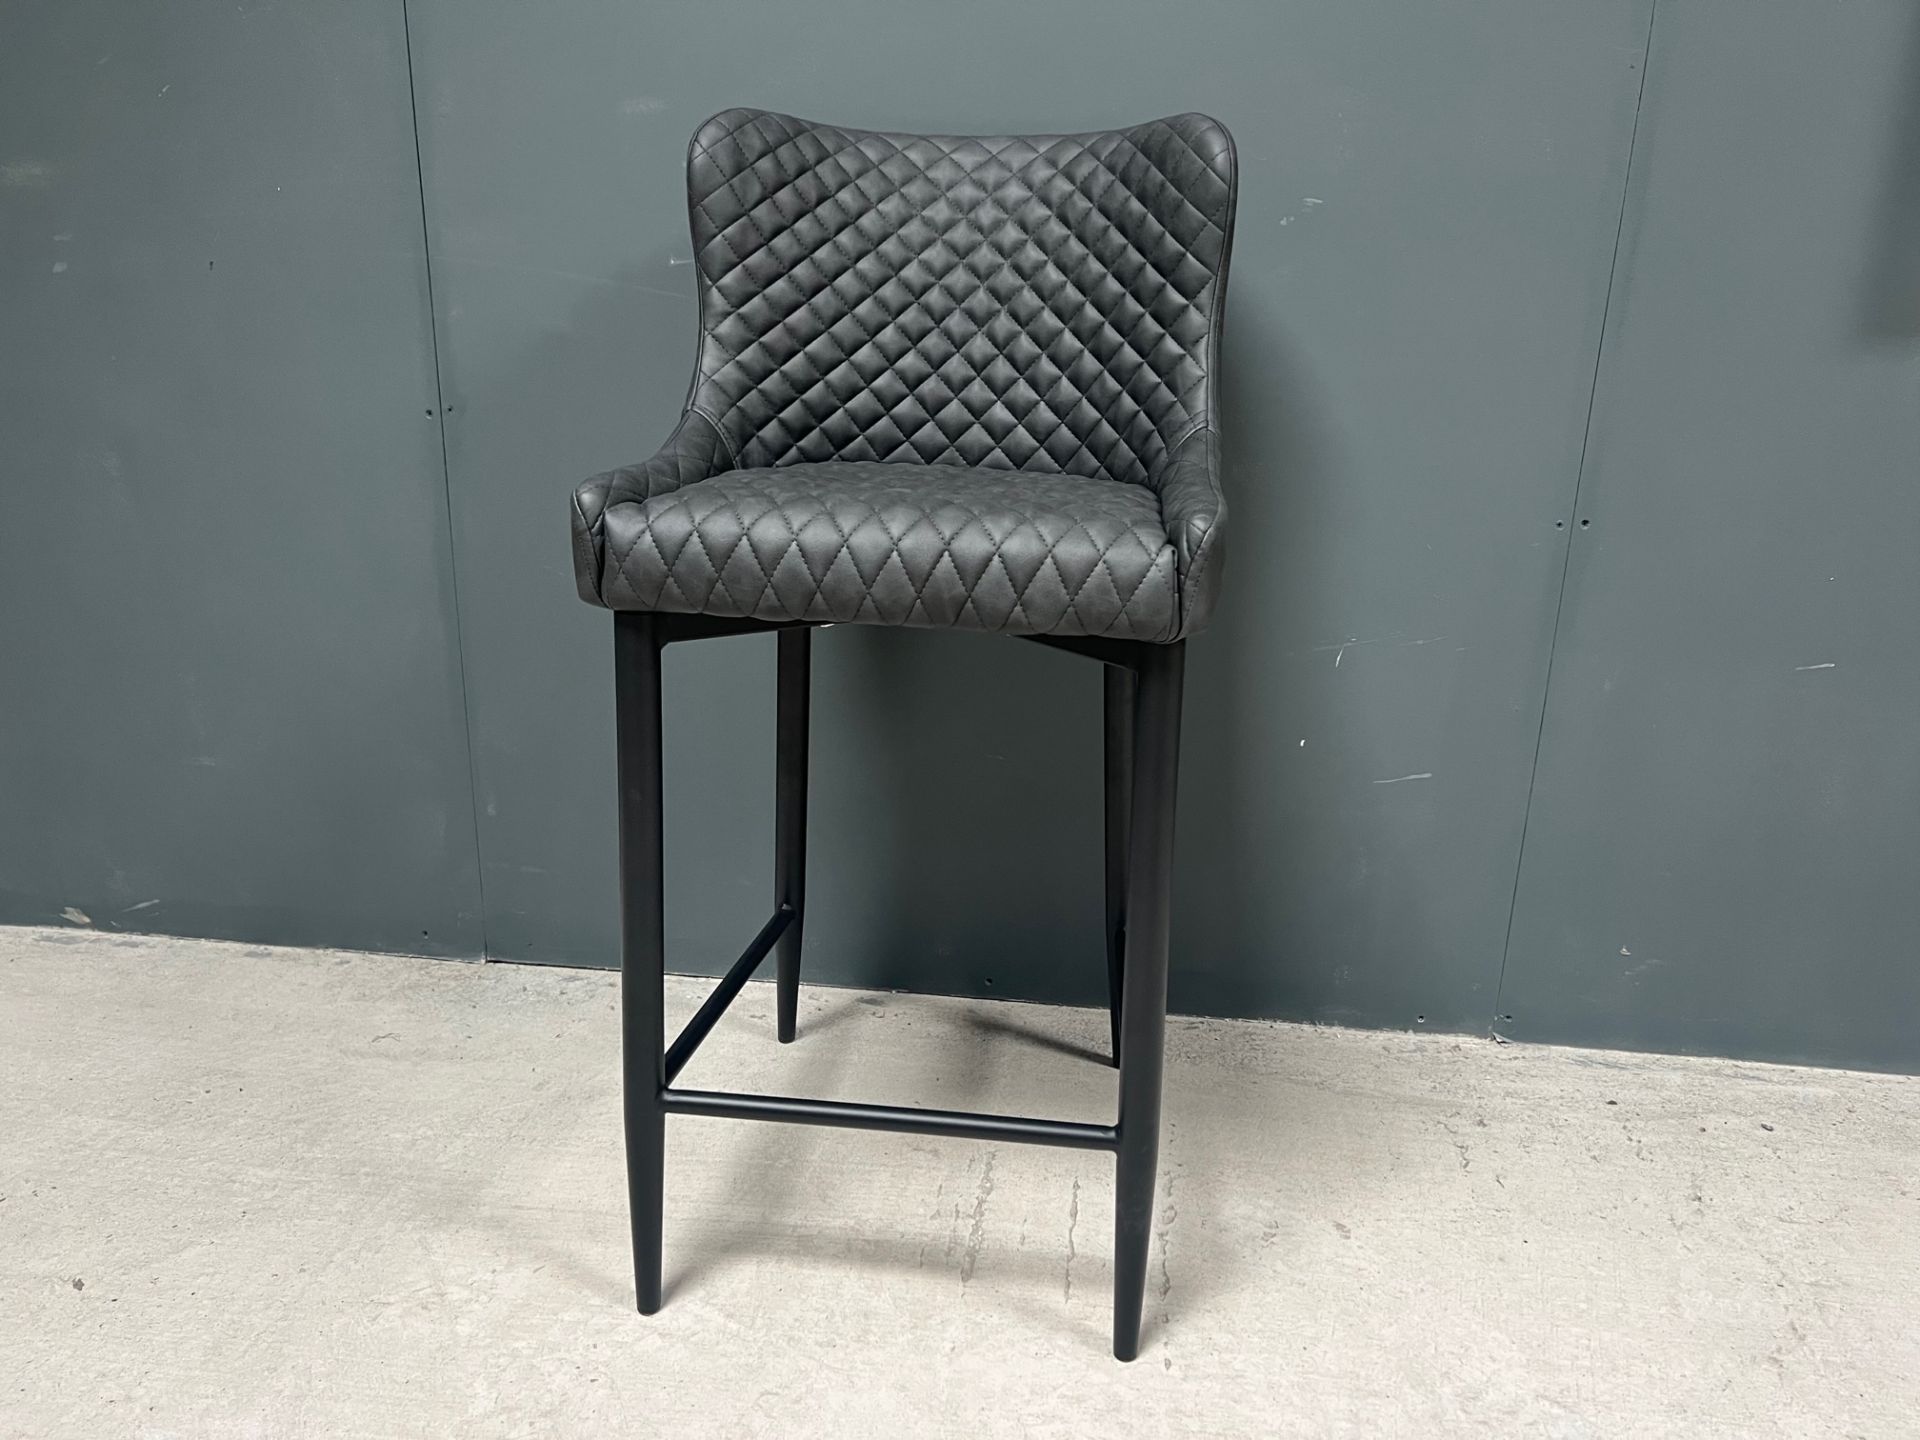 BOXED NEW PAIR OF CLASSIC PU LEATHER HIGH BAR STOOLS IN CHARCOAL